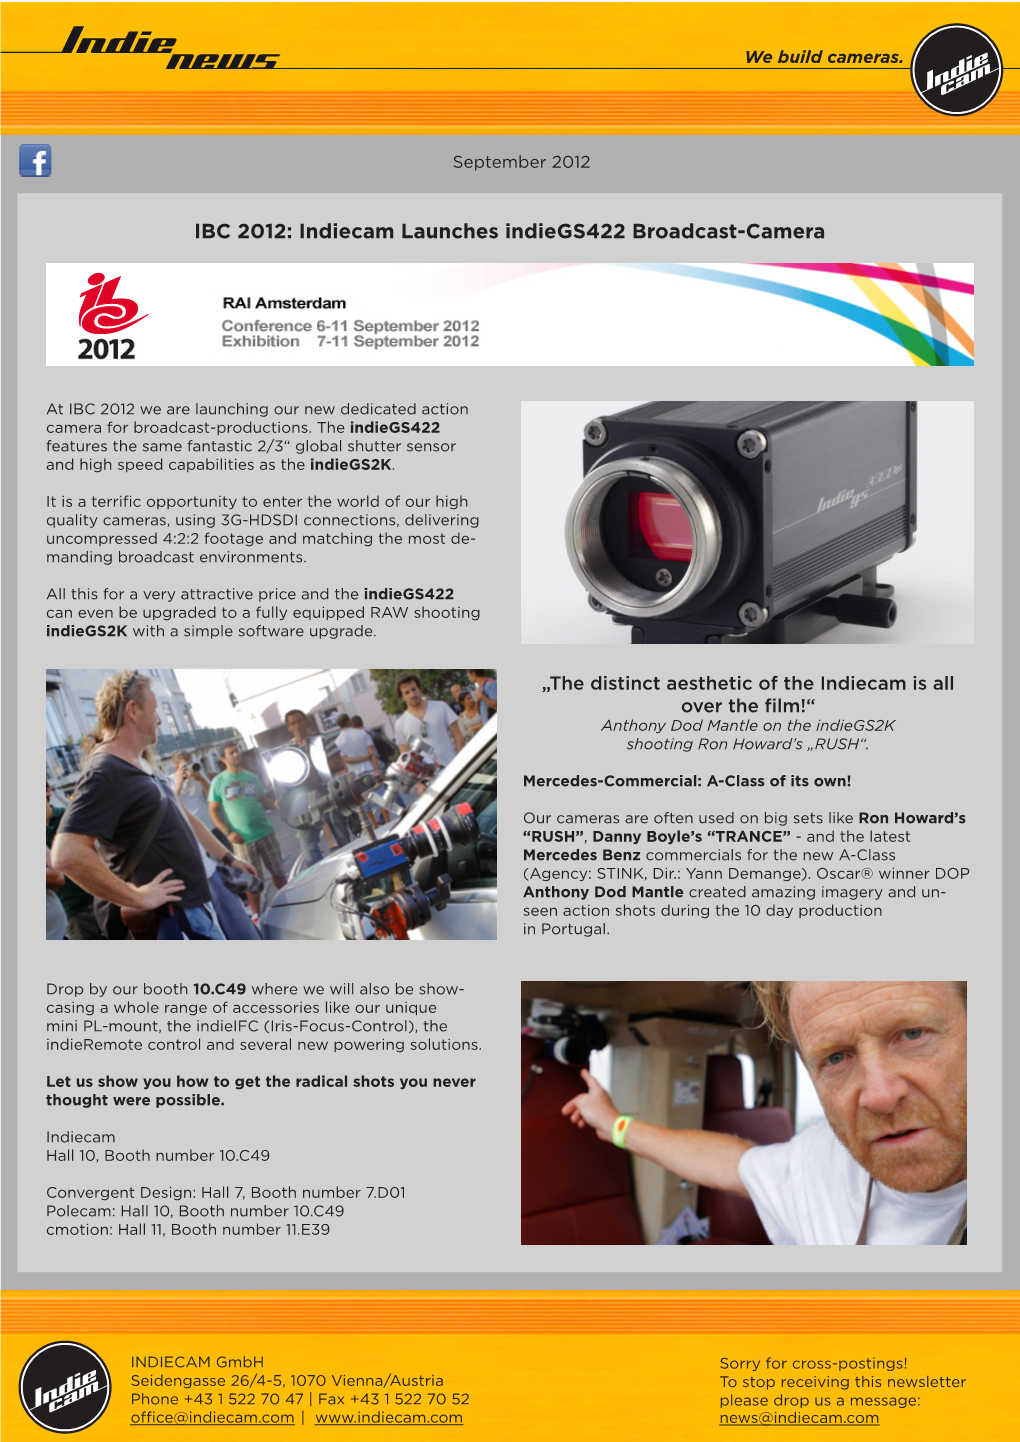 IBC 2012: Indiecam Launches Indiegs422 Broadcast-Camera